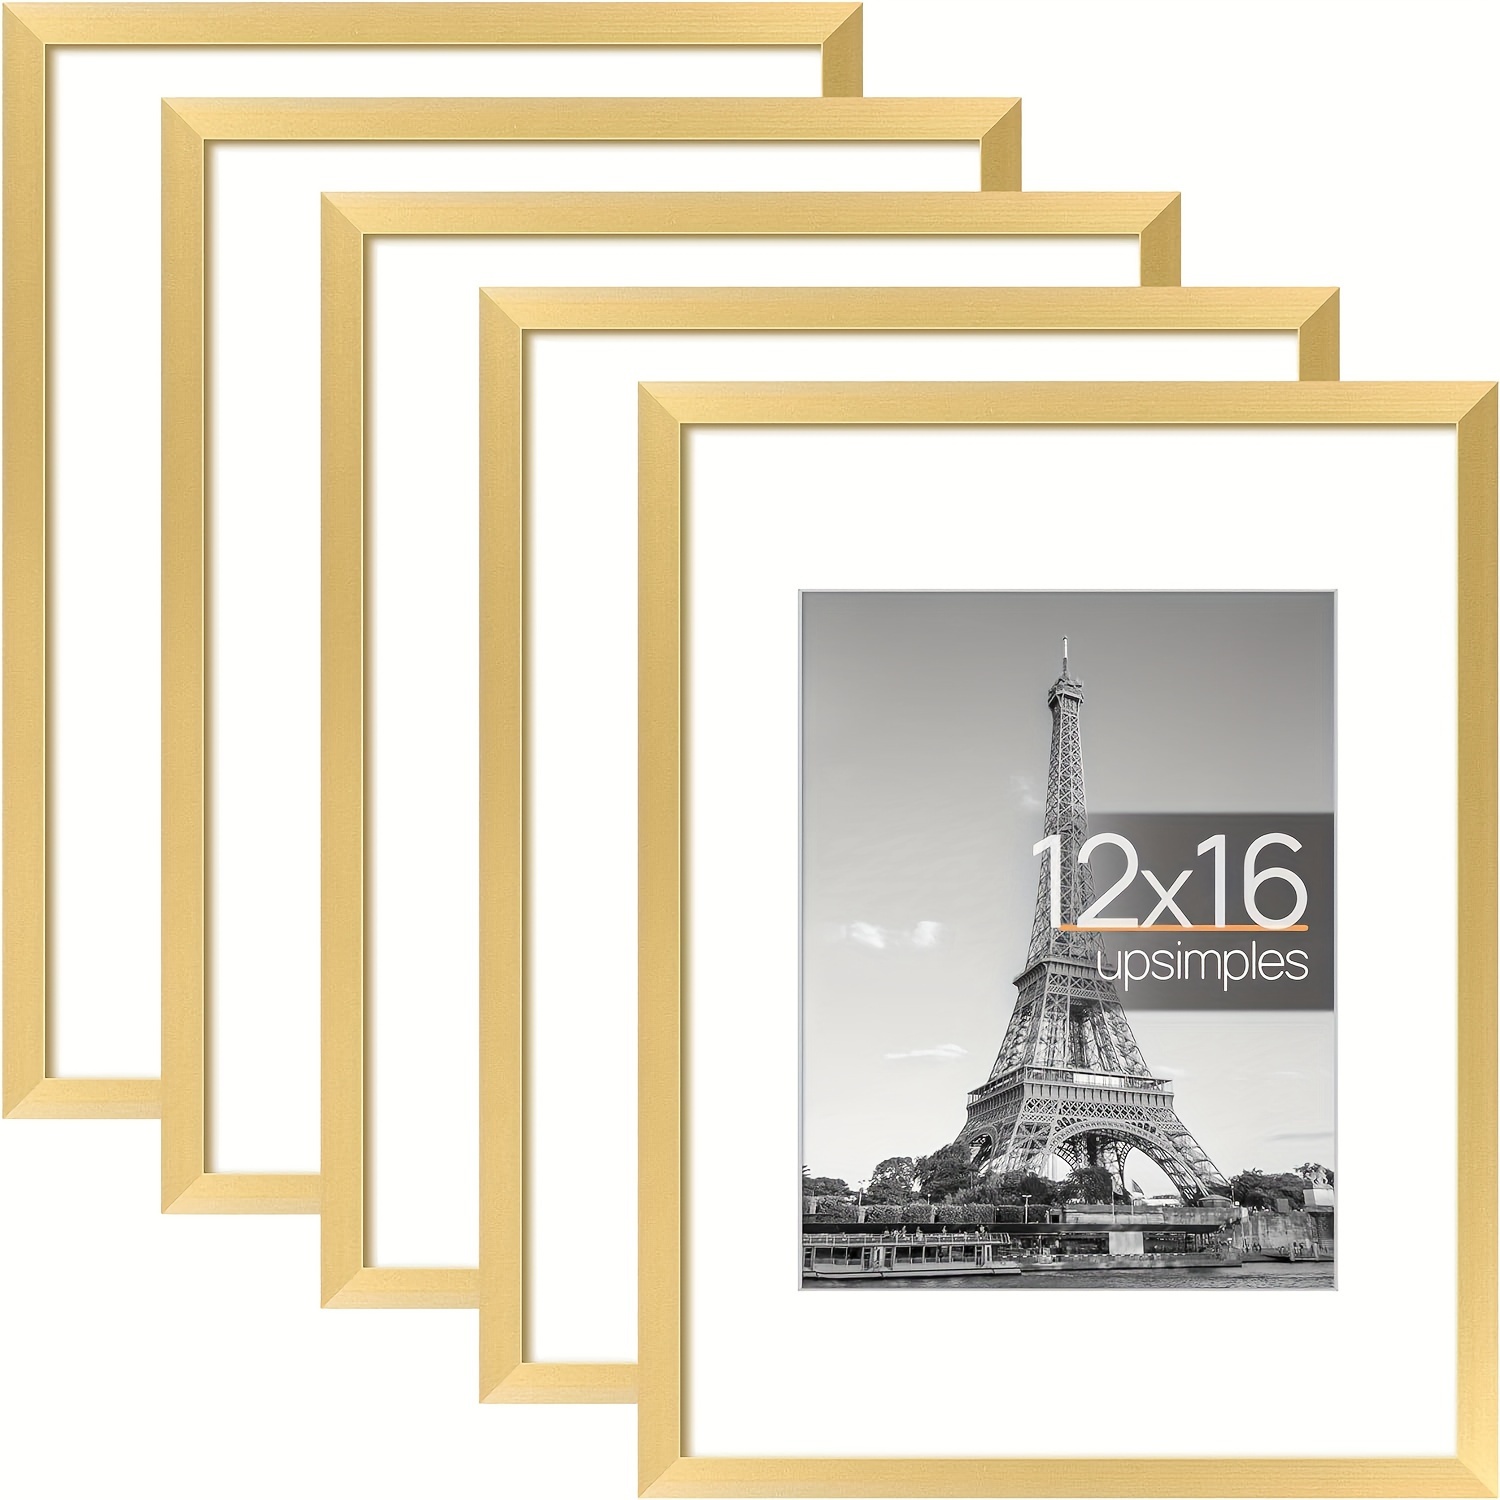 

Upsimples Set Of 5 12x16 Picture Frame, Display Pictures 8.5x11 With Mat Or 12x16 Without Mat, Wall Gallery Photo Frames, Gold